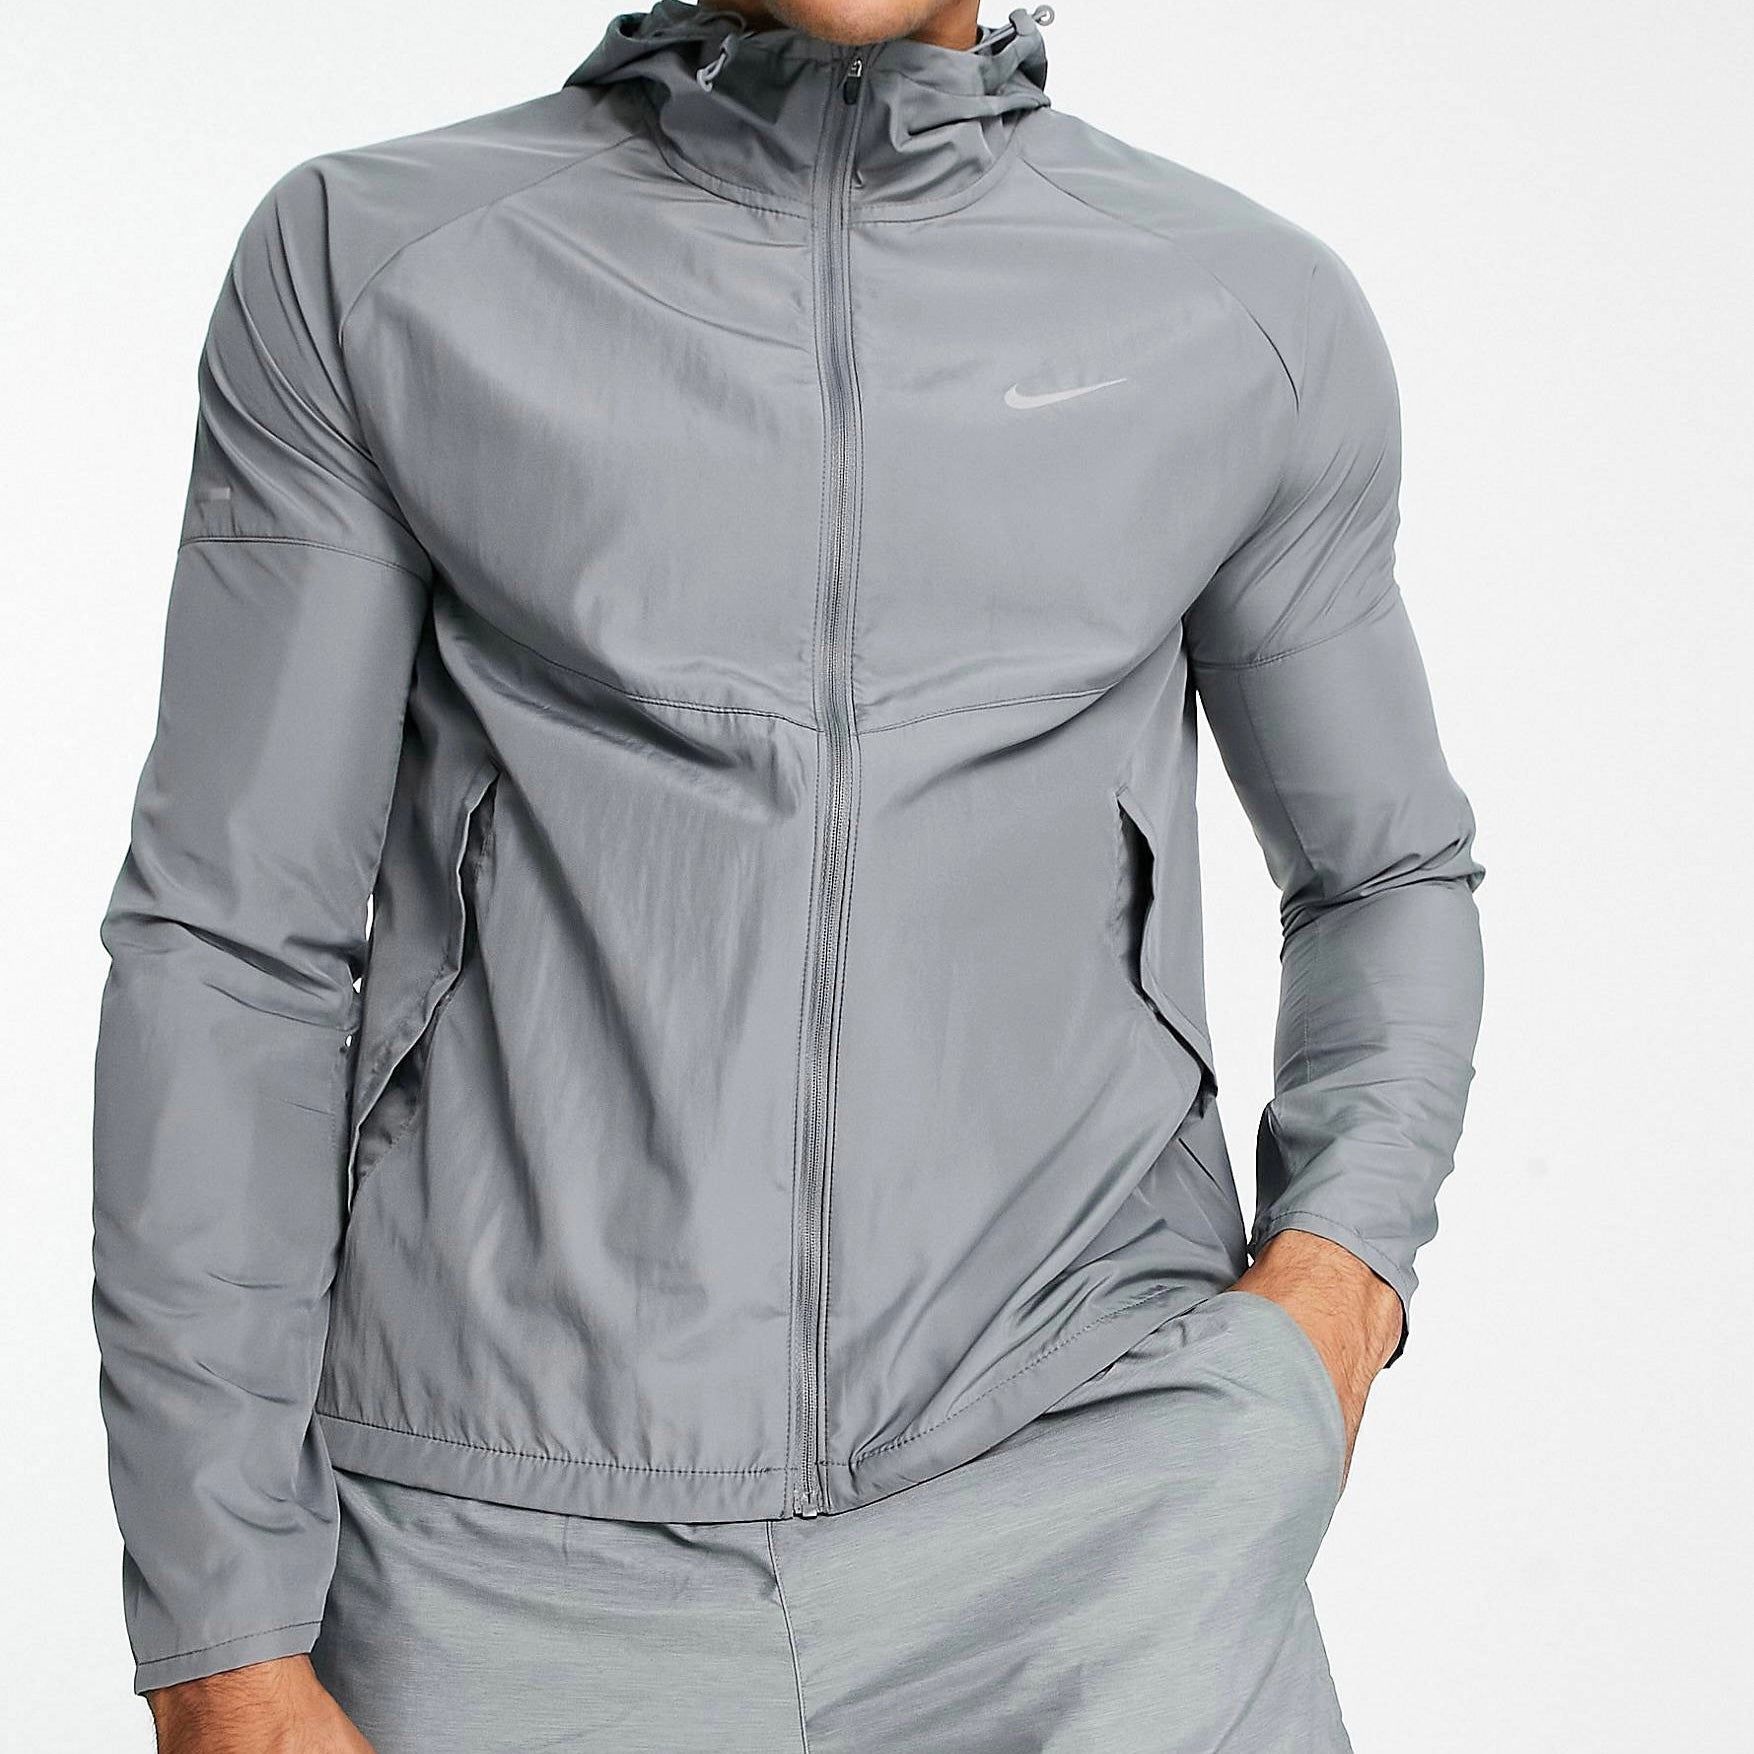 Nike Windrunner Jacket - Grey – Thread Connect